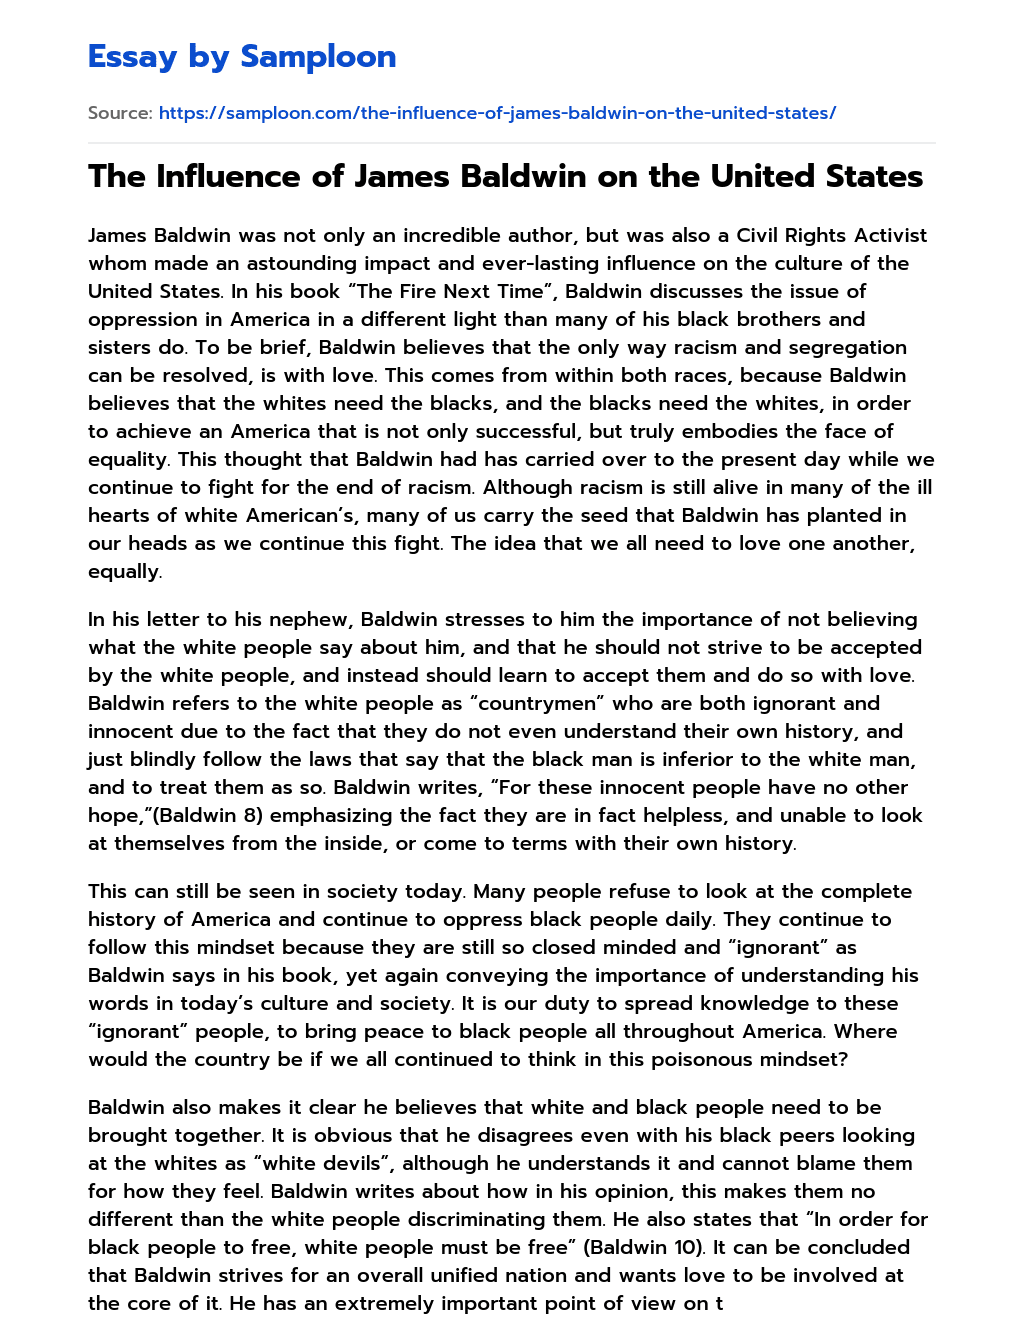 The Influence of James Baldwin on the United States essay